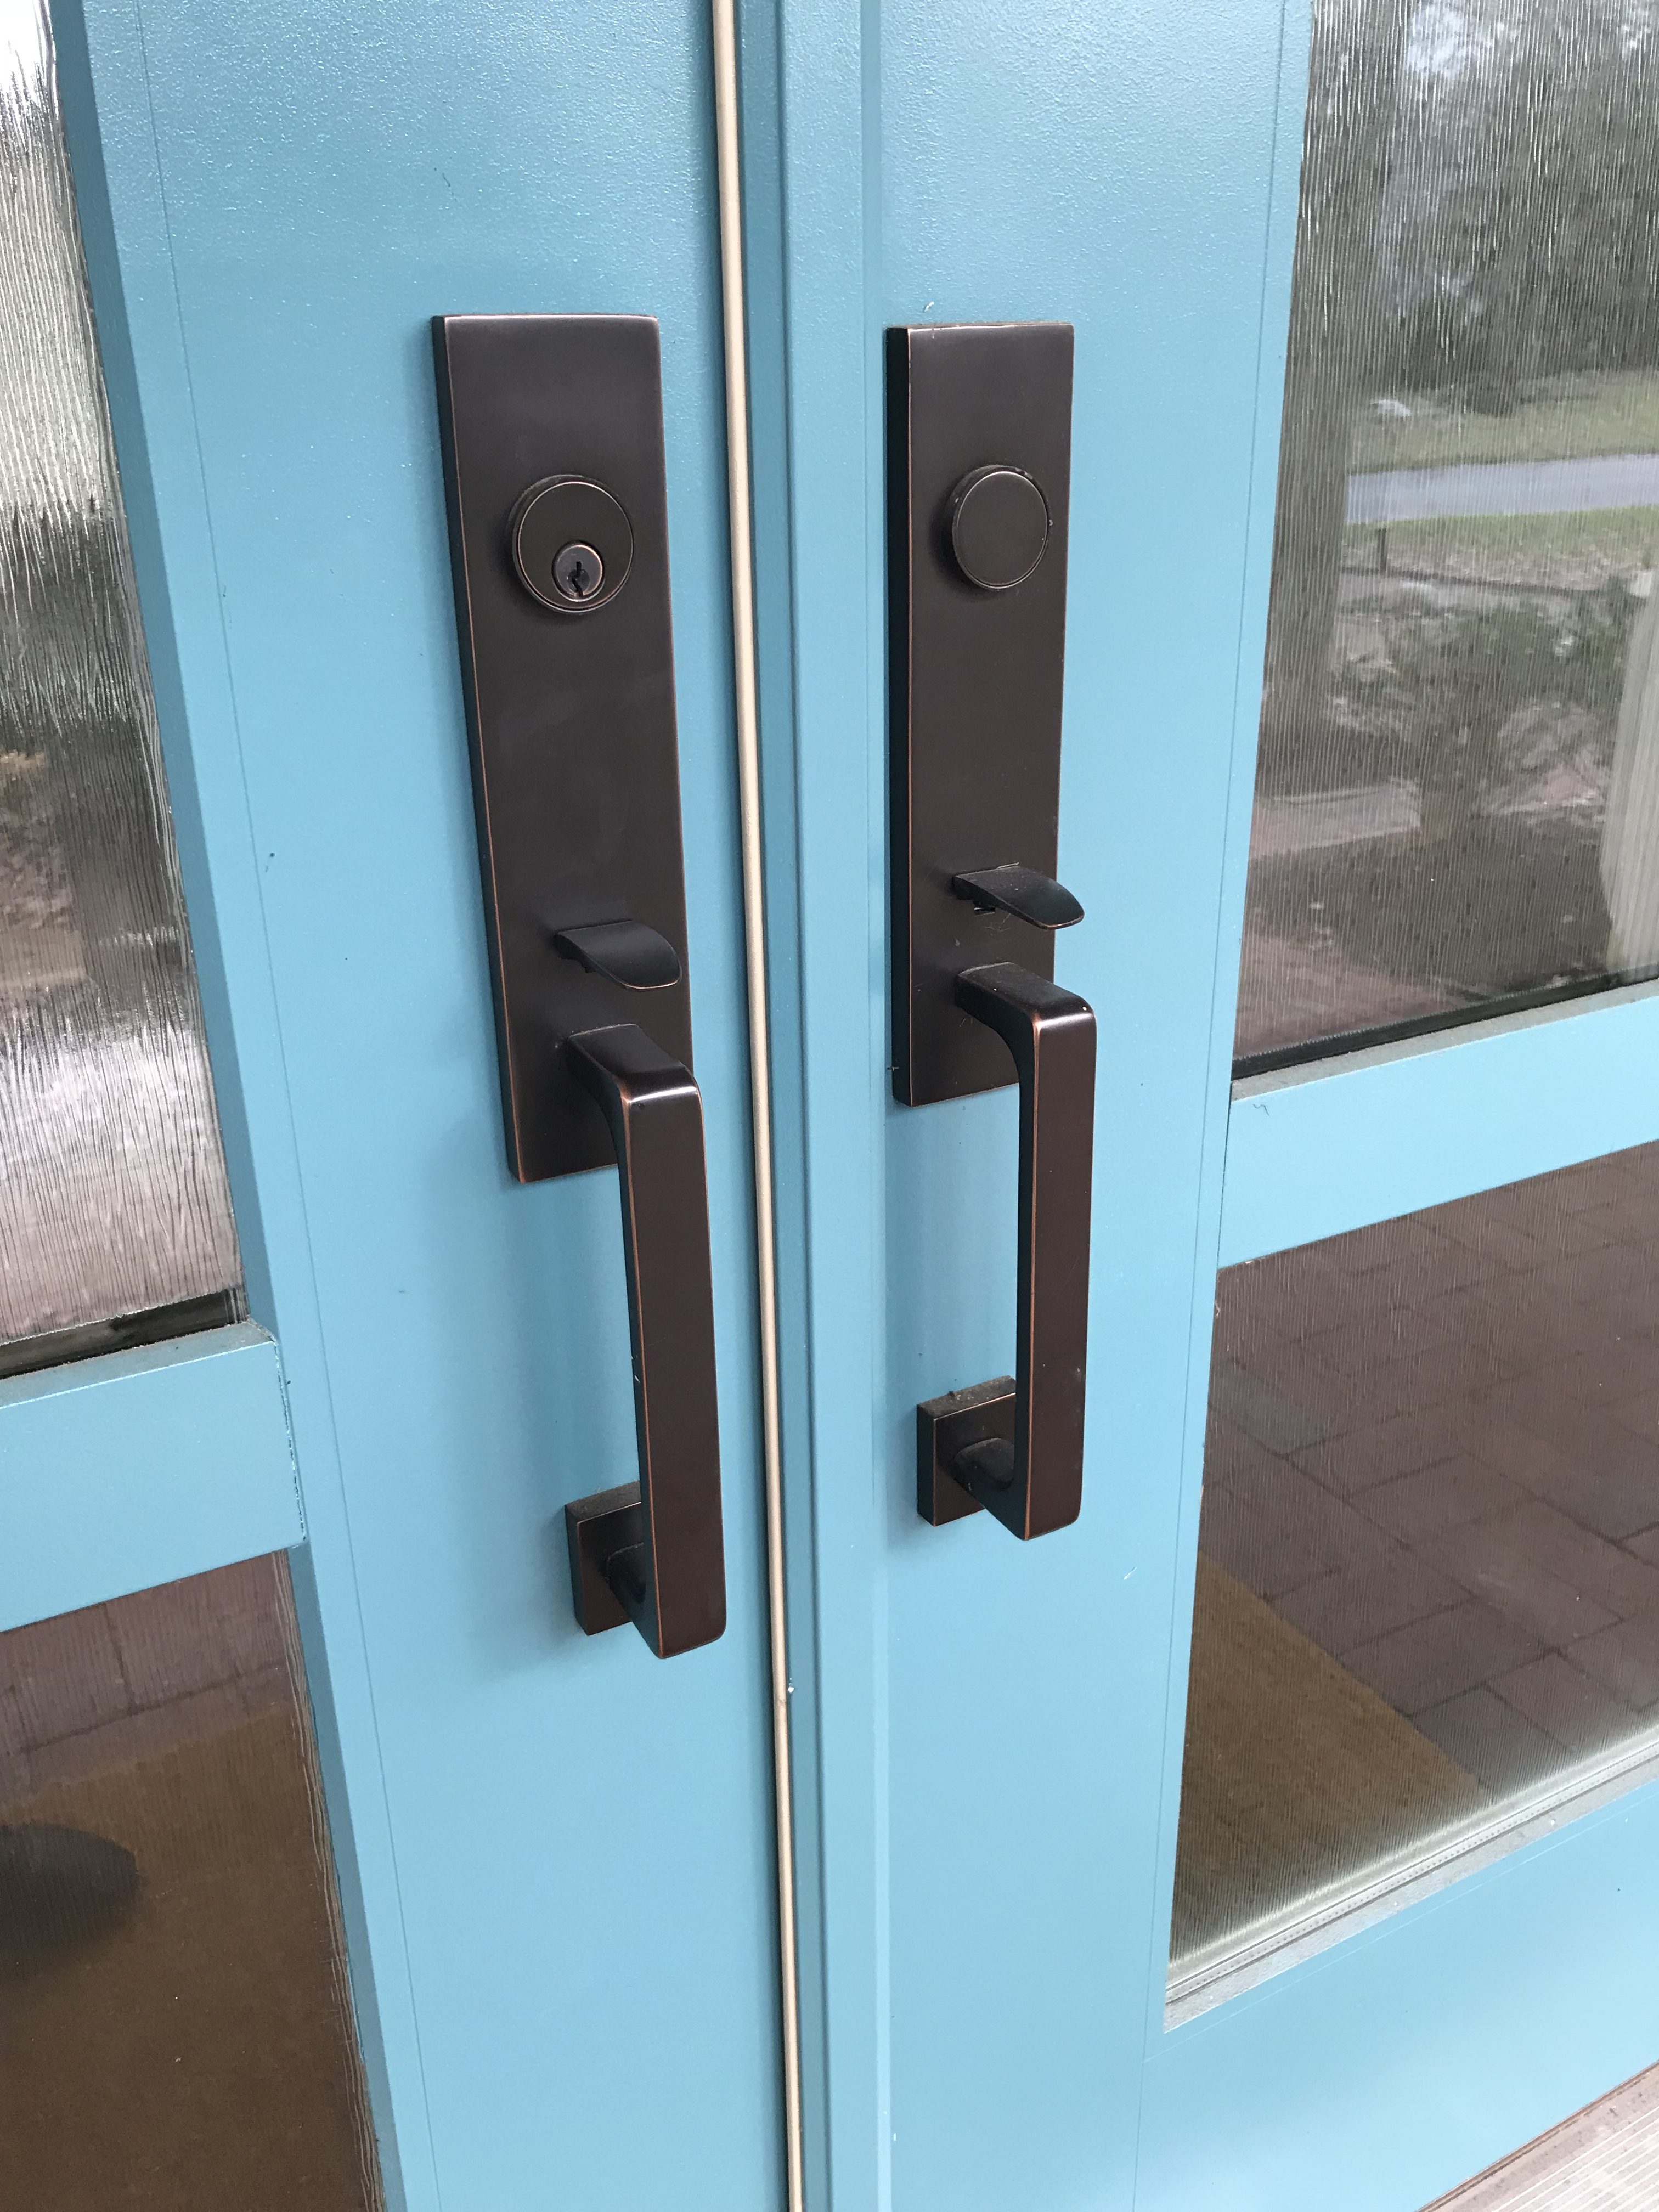 A Locksmith Near Me Who Can Change My Lock – The Many Advantages